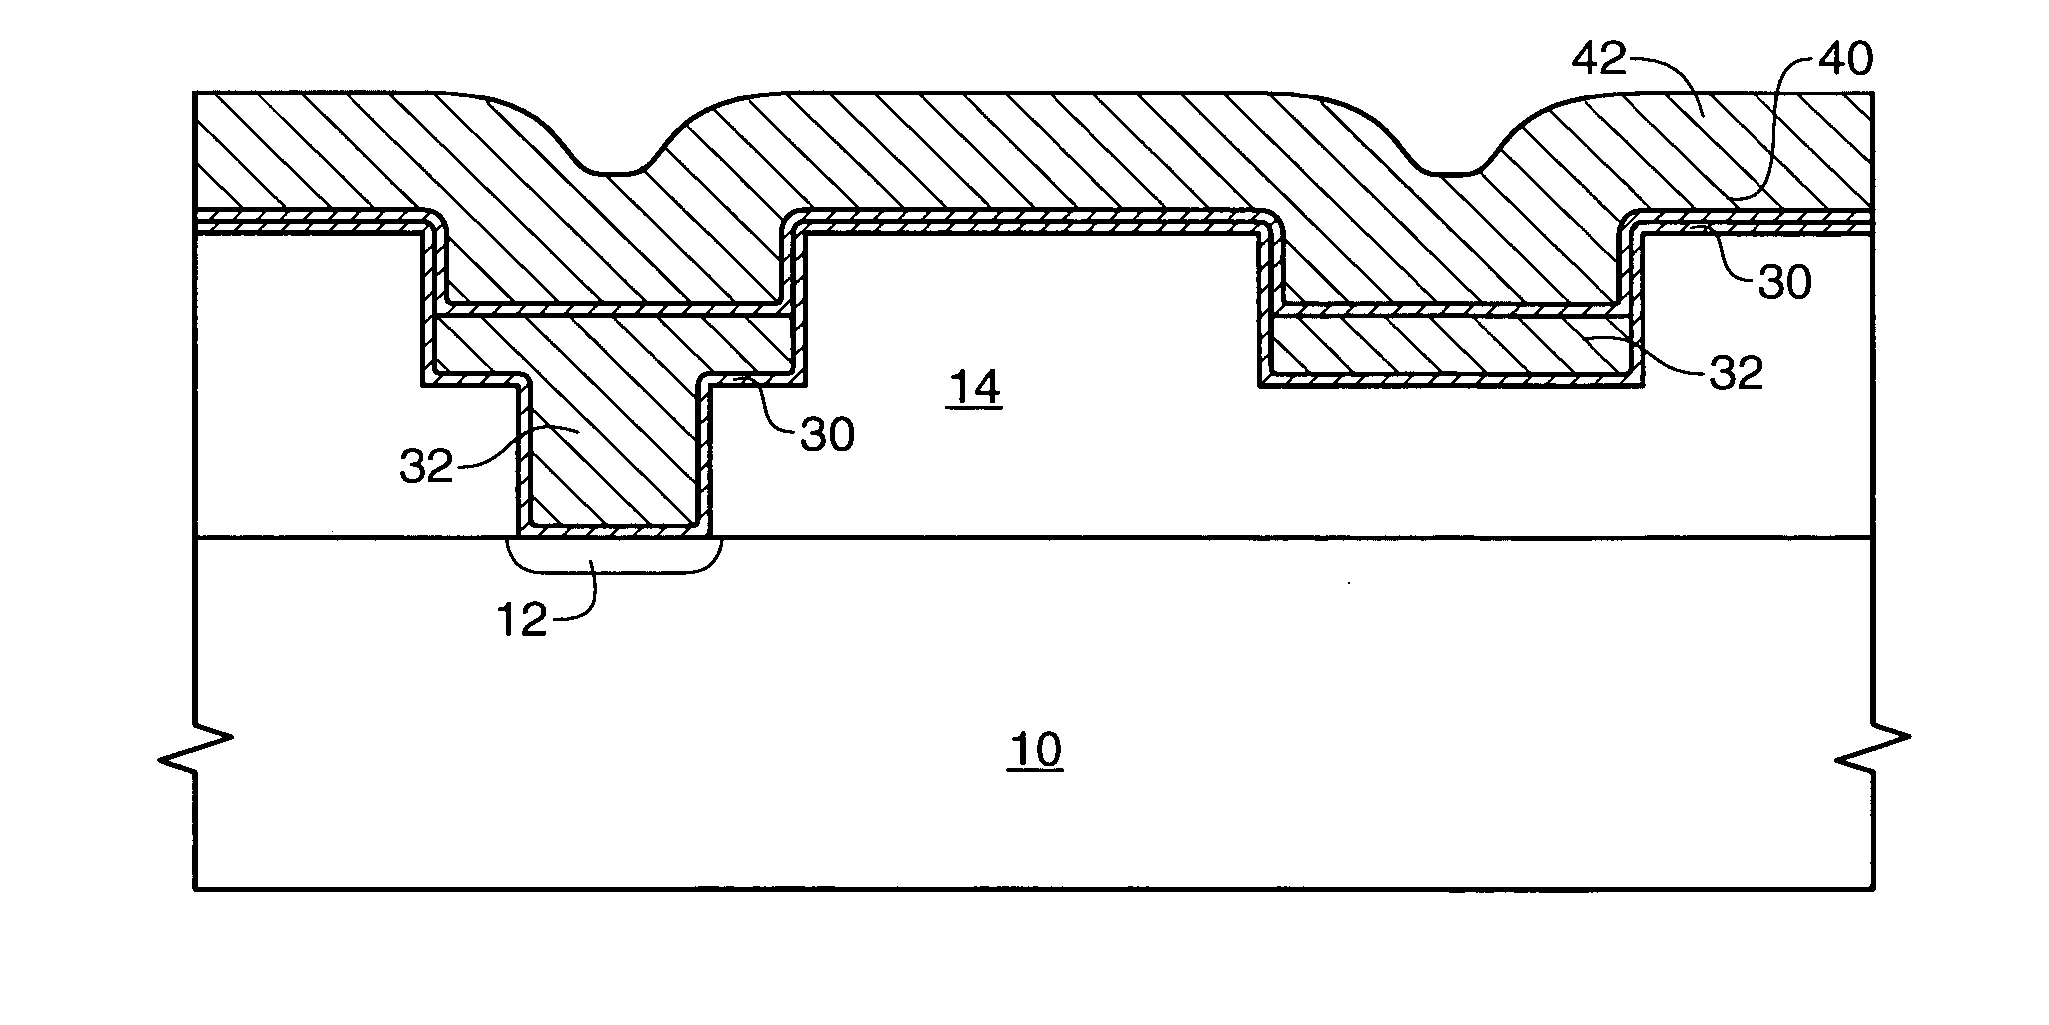 Method for forming a dual layer, low resistance metallization during the formation of a semiconductor device